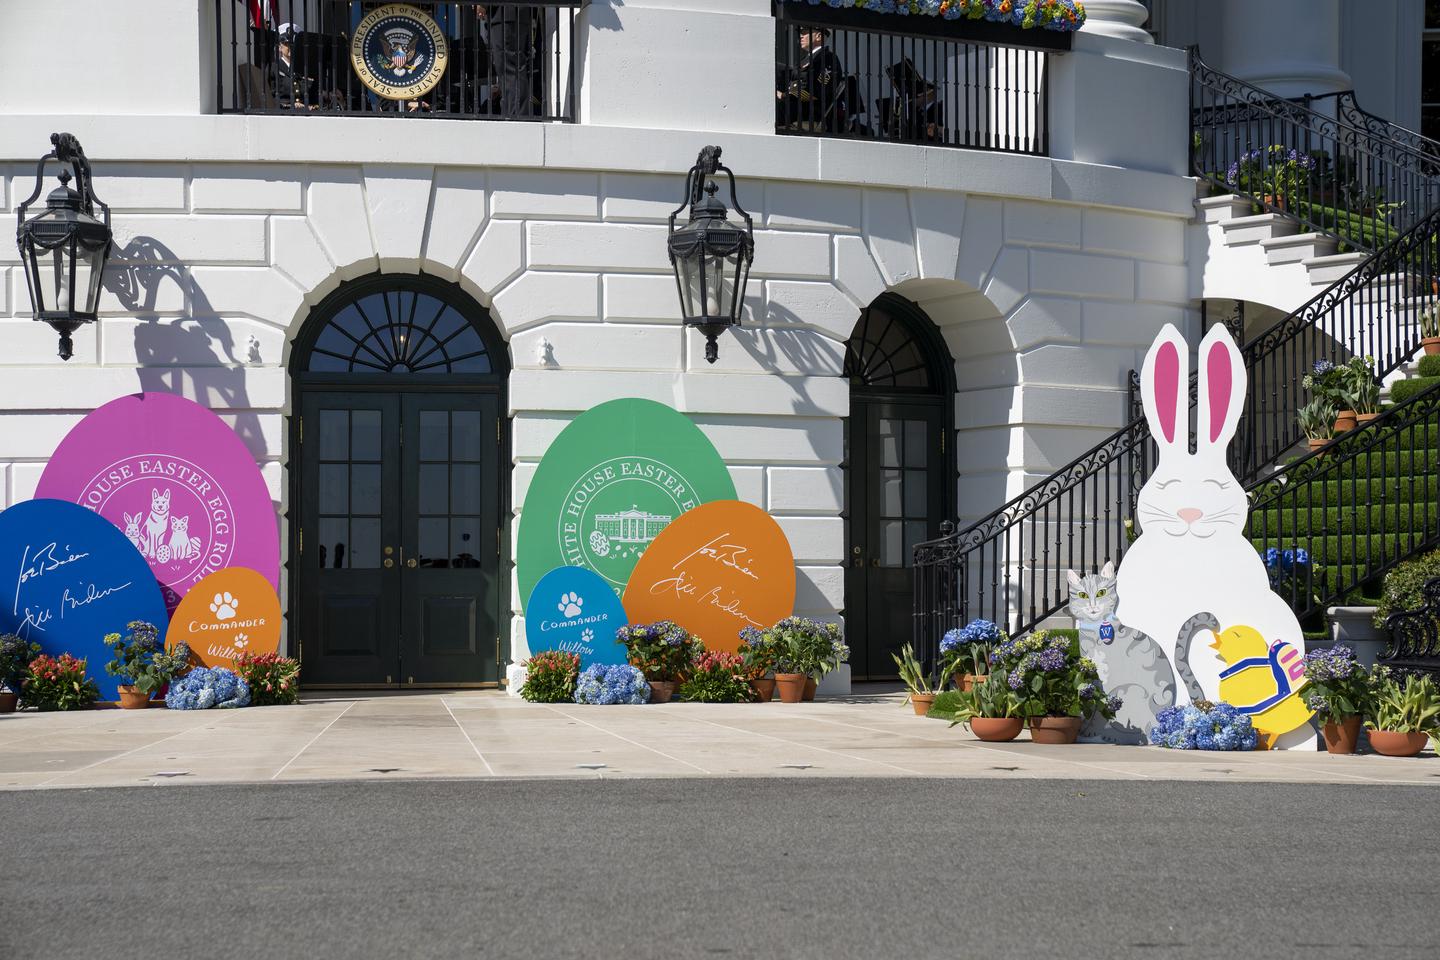 White House entry point, complete with a staircase on the right, a large bunny cutout, a cat cutout, and baby chick cutout. Other decor includes several large egg cutouts indicating to the White House Easter Egg Roll and signatures of President Joe Biden & First Lady Jill Biden. Decorations for Easter Egg Roll event at White House entry point